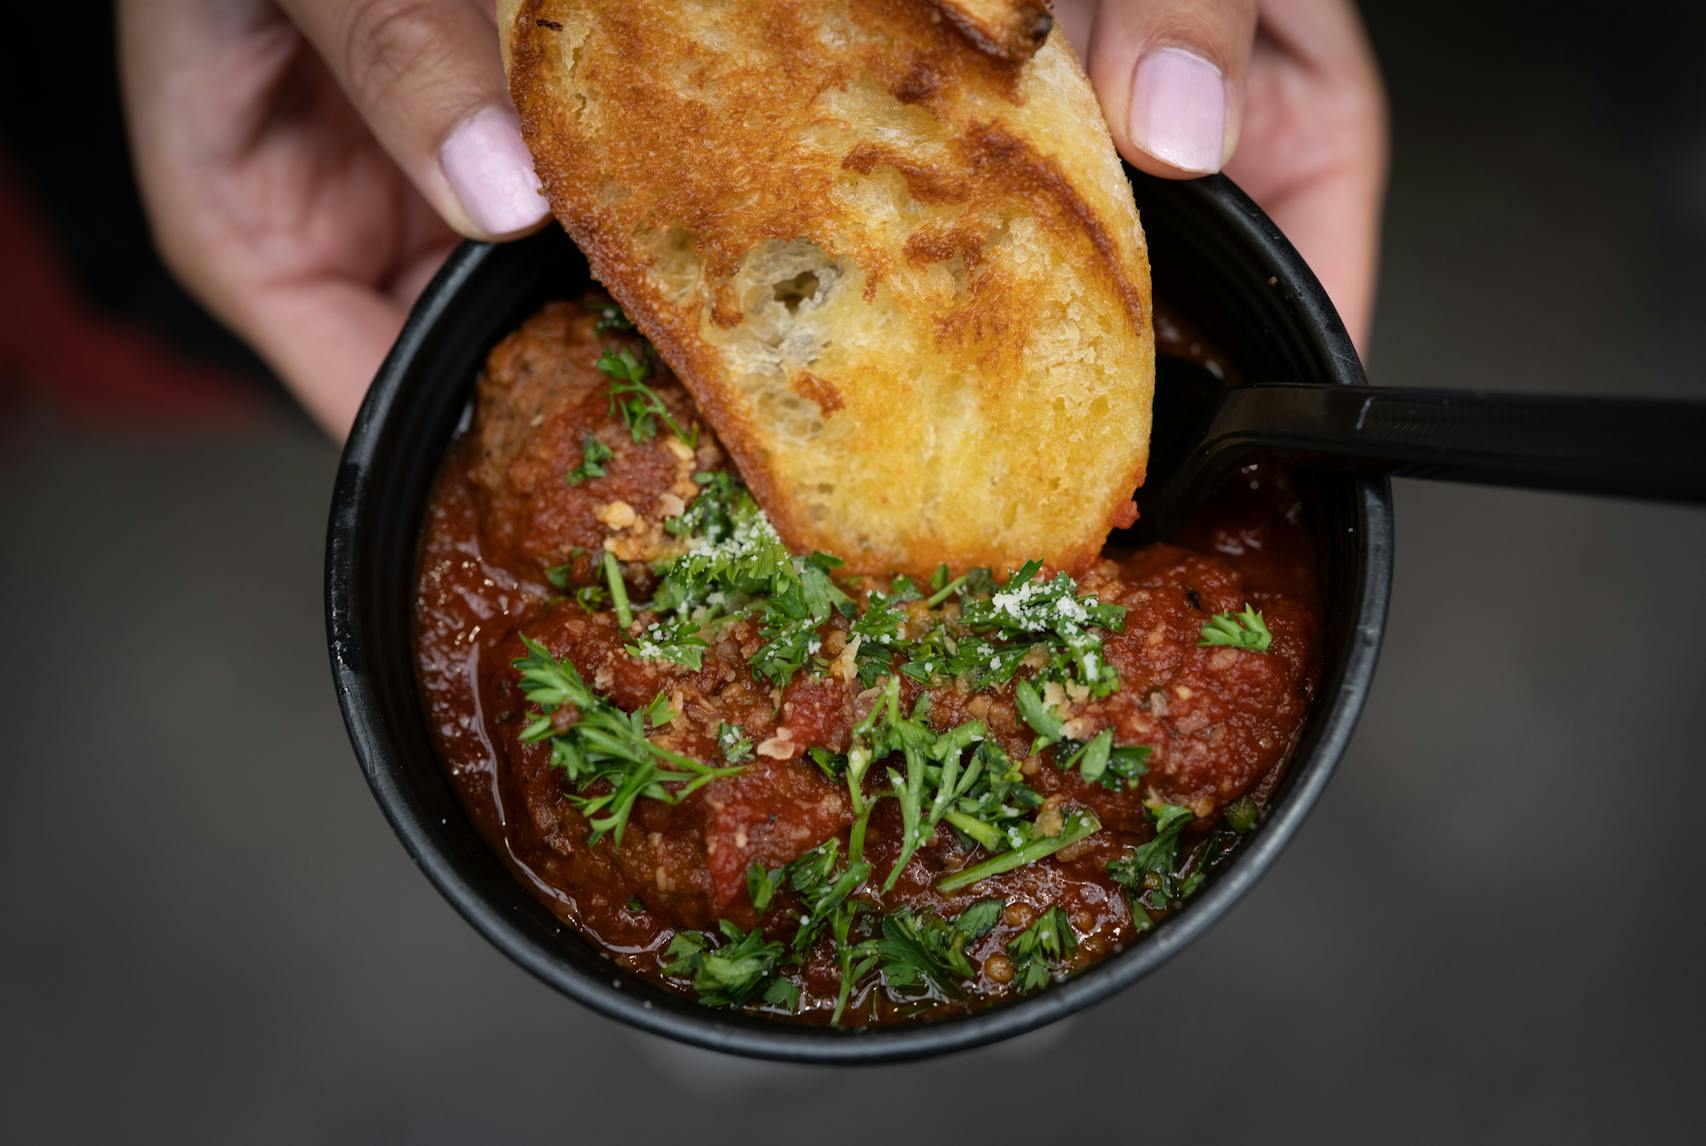 “Meat”balls and Marinara from French Meadow. New foods at the Minnesota State Fair photographed on Thursday, Aug. 25, 2022 in Falcon Heights, Minn. ] RENEE JONES SCHNEIDER • renee.jones@startribune.com